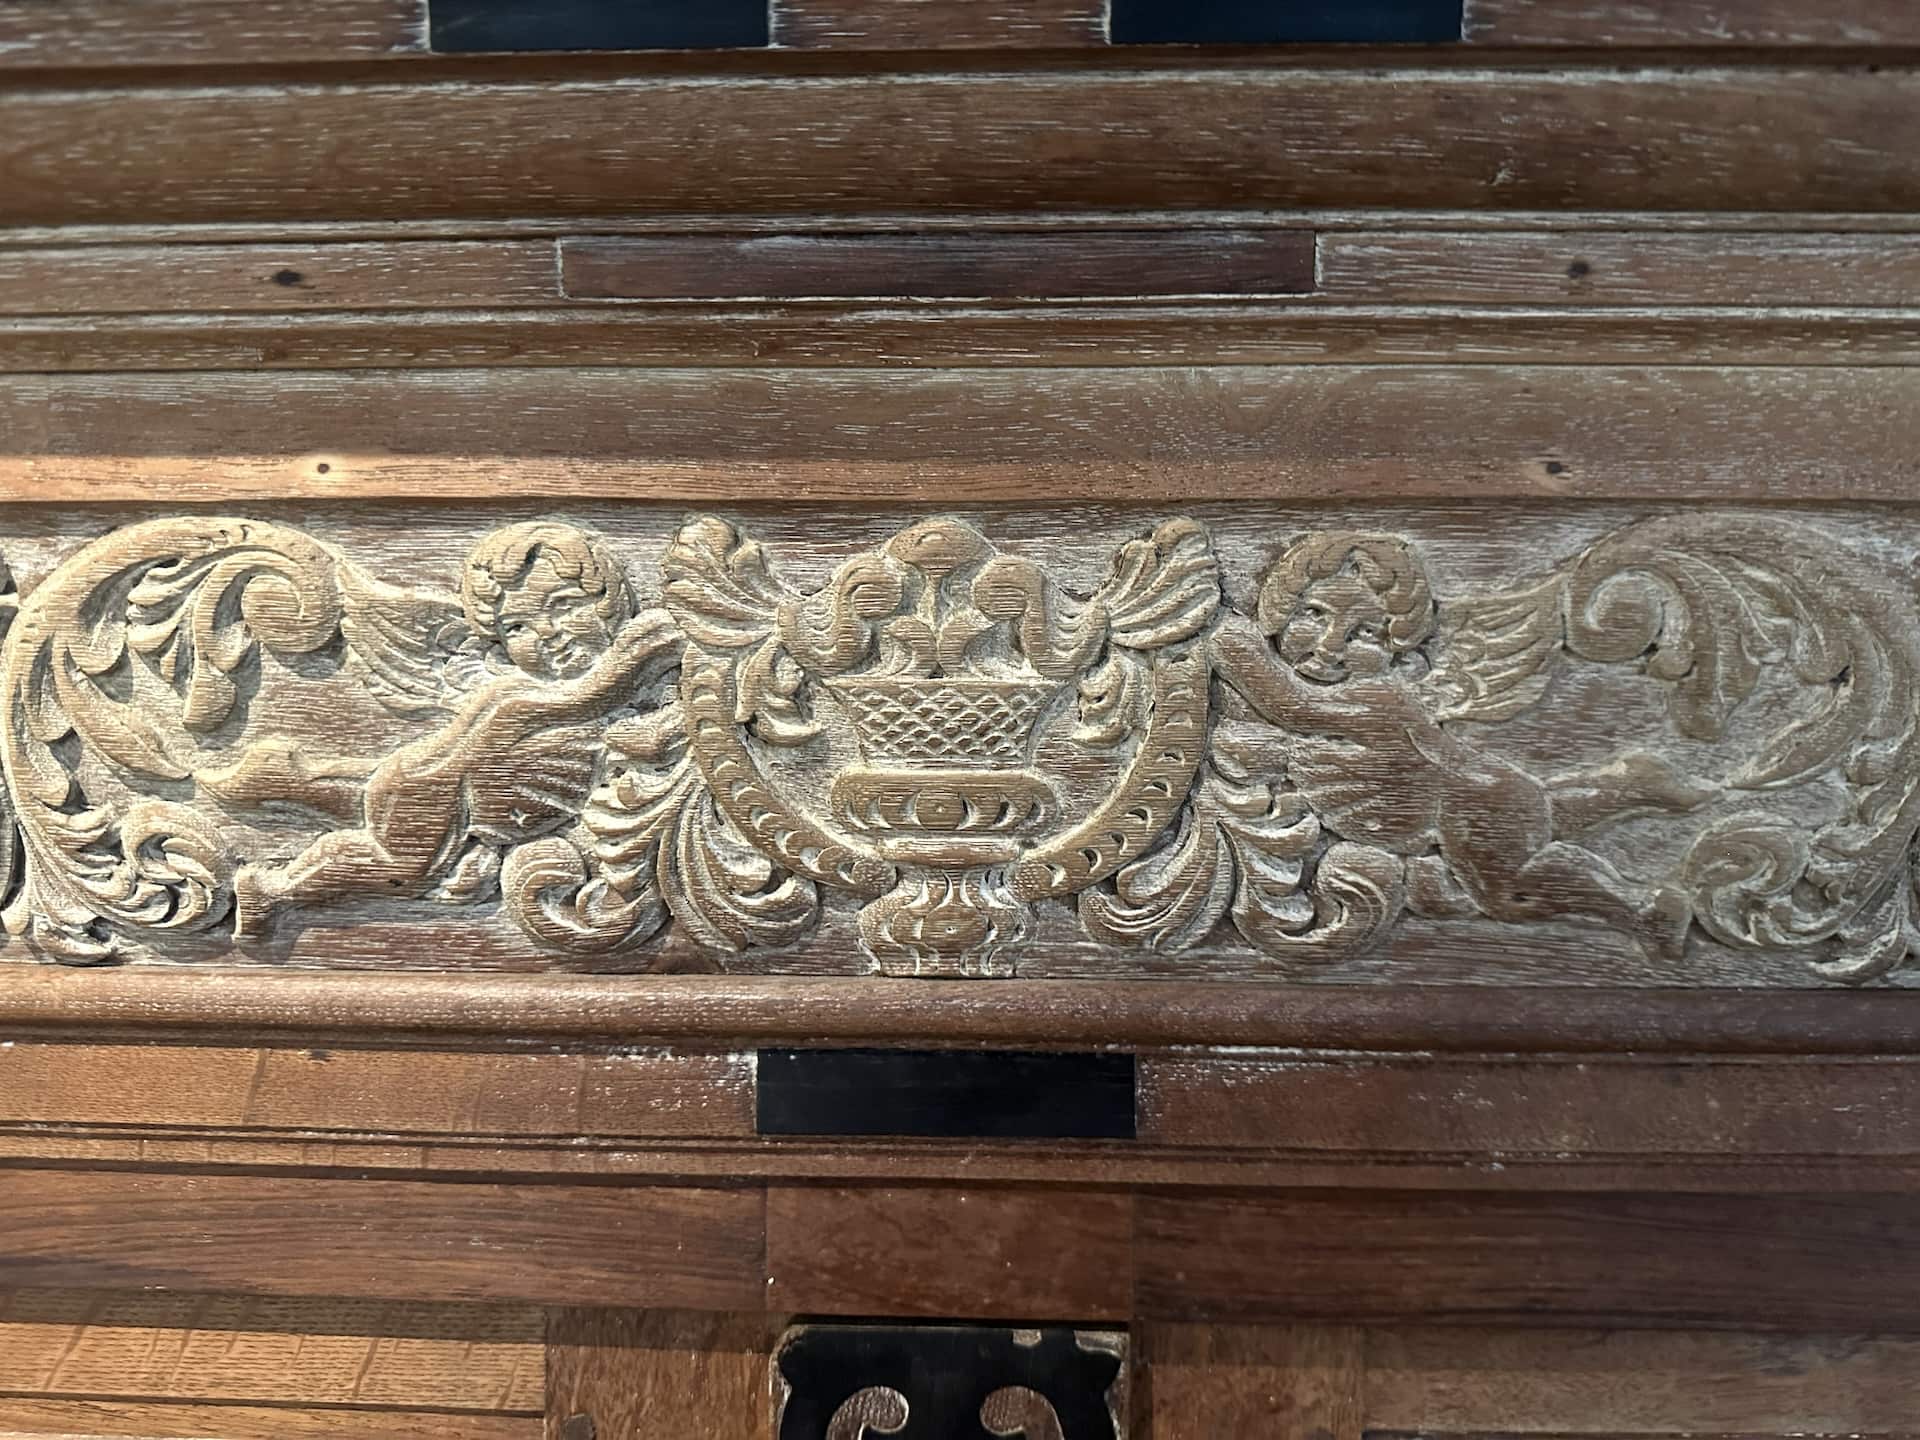 Carving on the armoire at the Historical Museum of Aruba